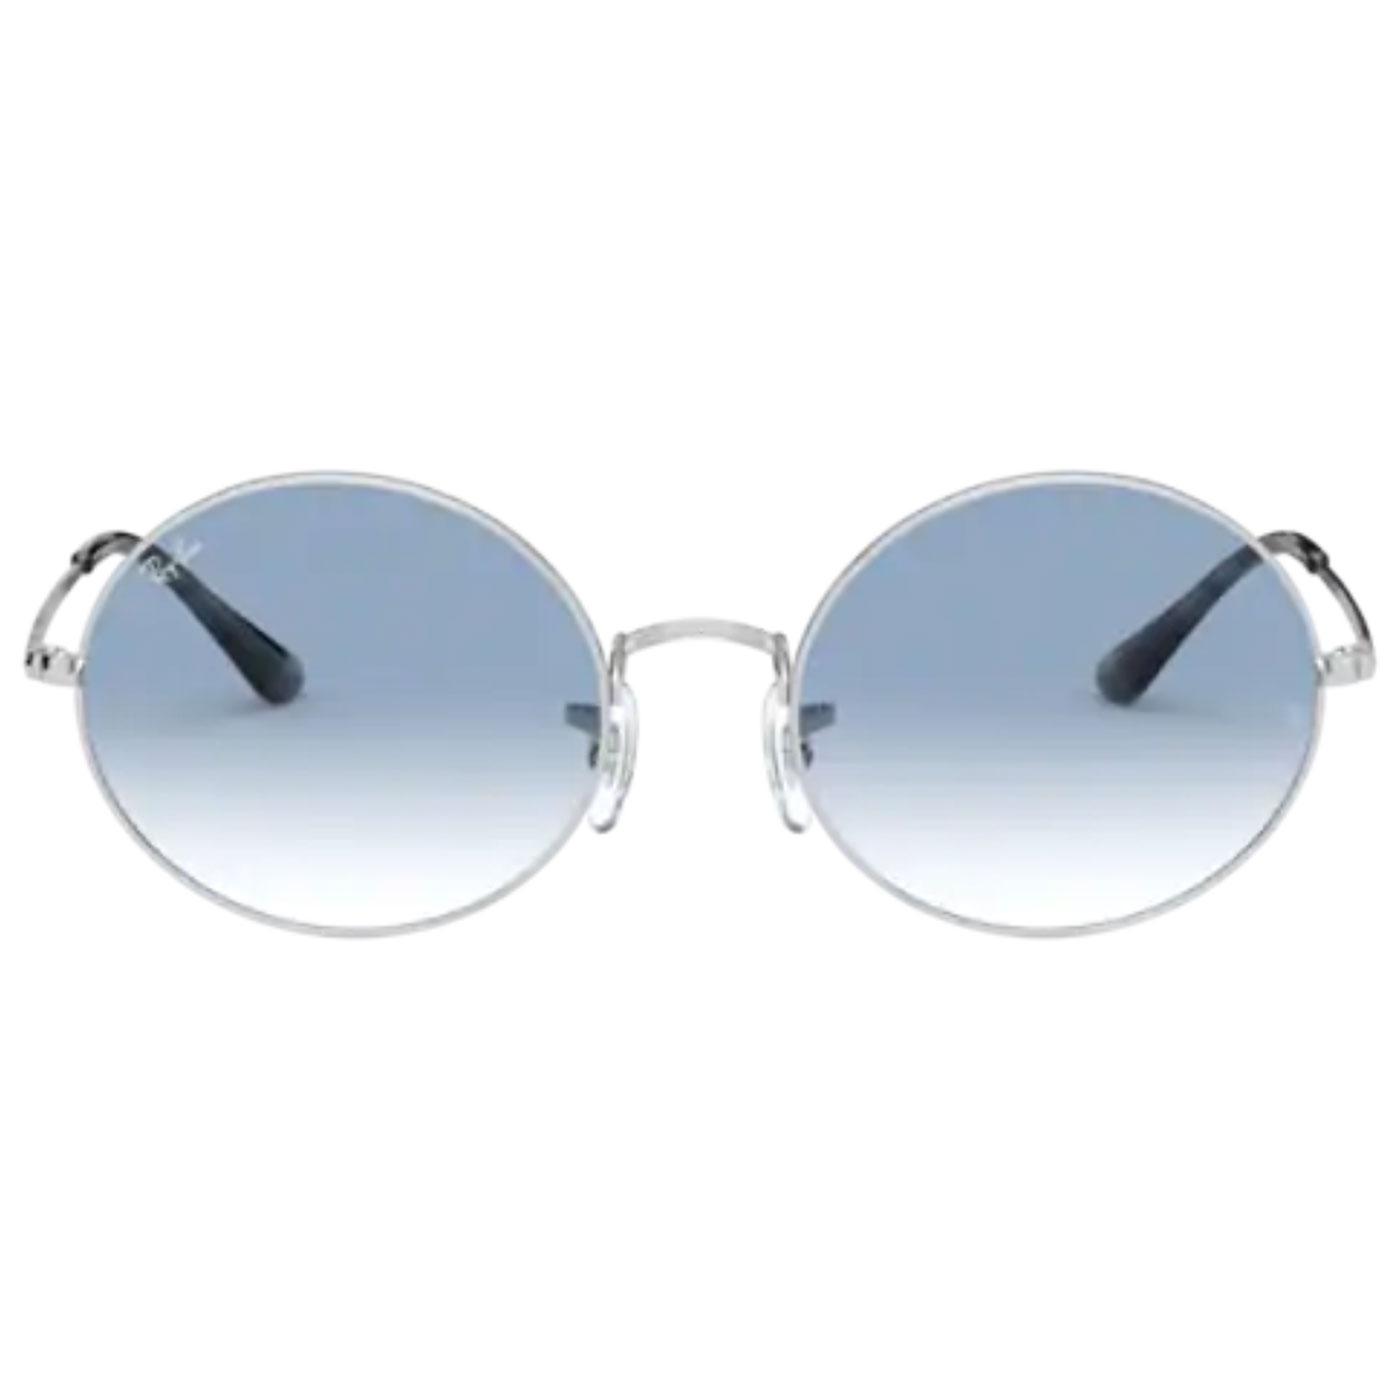 RAY-BAN RB1970 Retro 1960s Oval Sunglasses in Silver/Blue